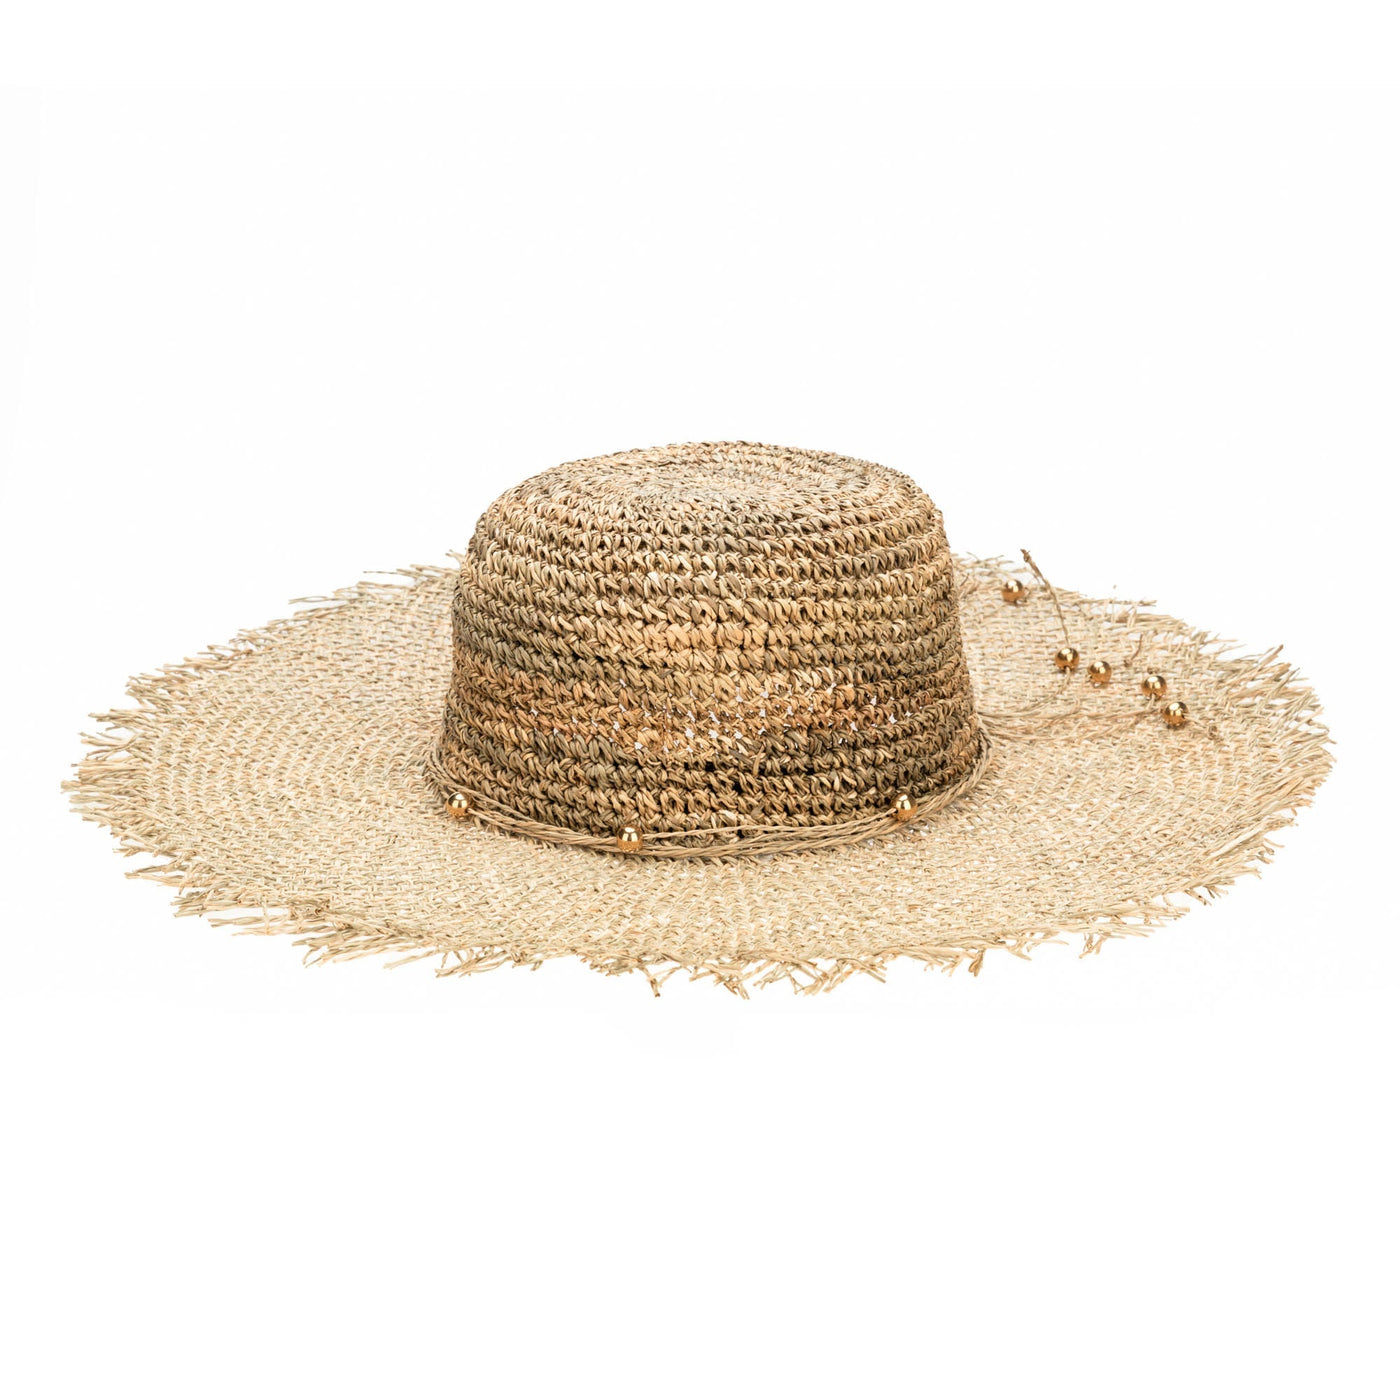 CROCHET - Runaway - Crochet Seagrass Crown With Open Weave Brim And Gold Beaded Trim